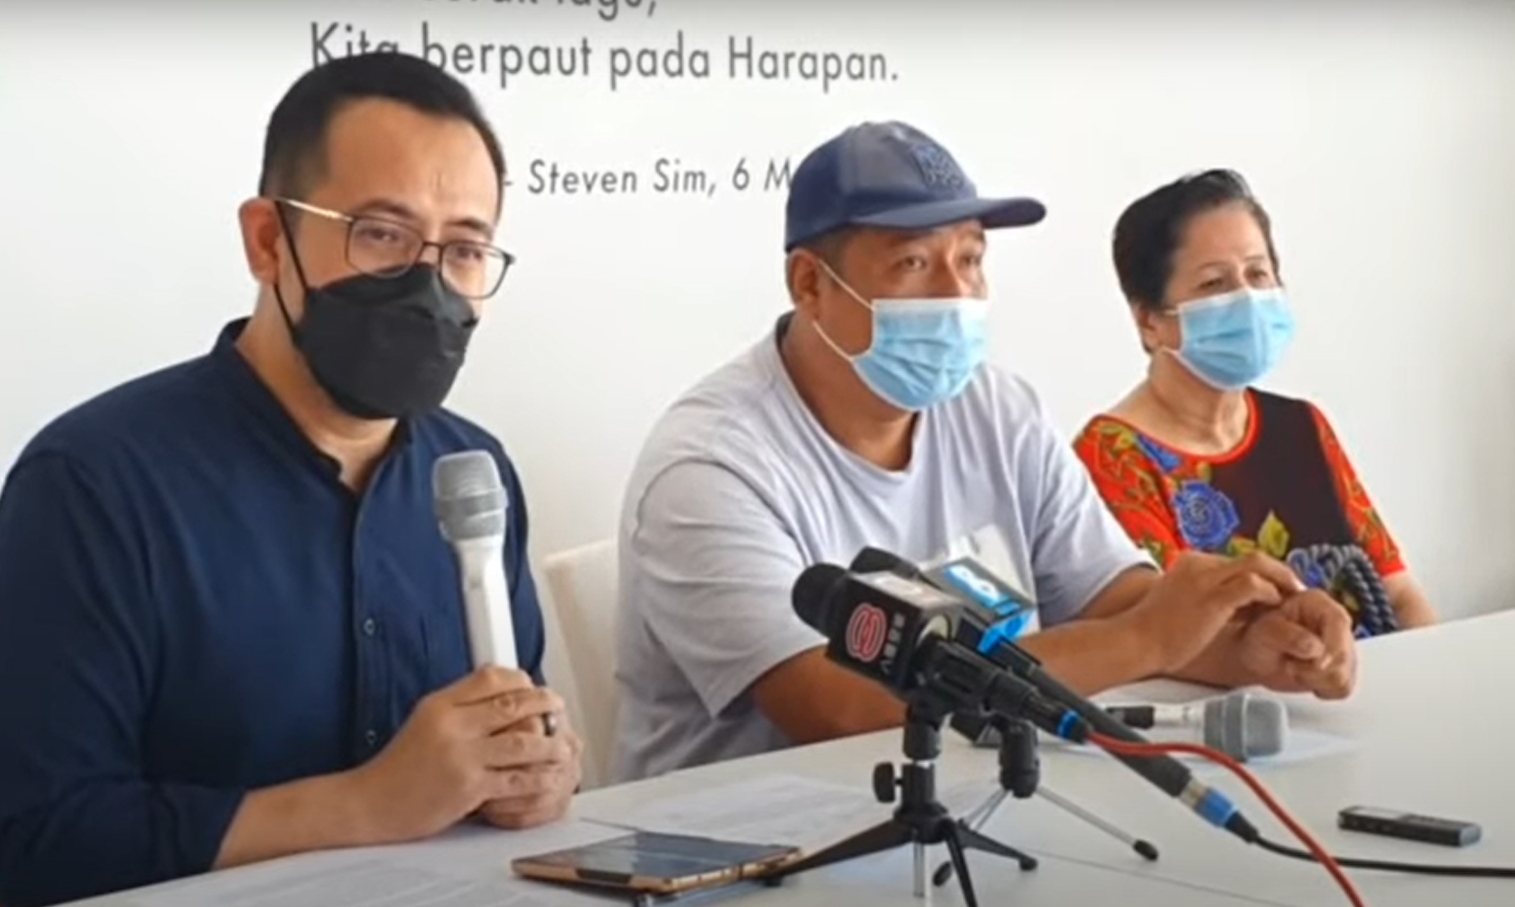 Bukit Mertajam MP Steven Sim says he has already contacted the Ministry of Foreign Affairs concerning the job scam syndicate in Cambodia. Image credit: NST